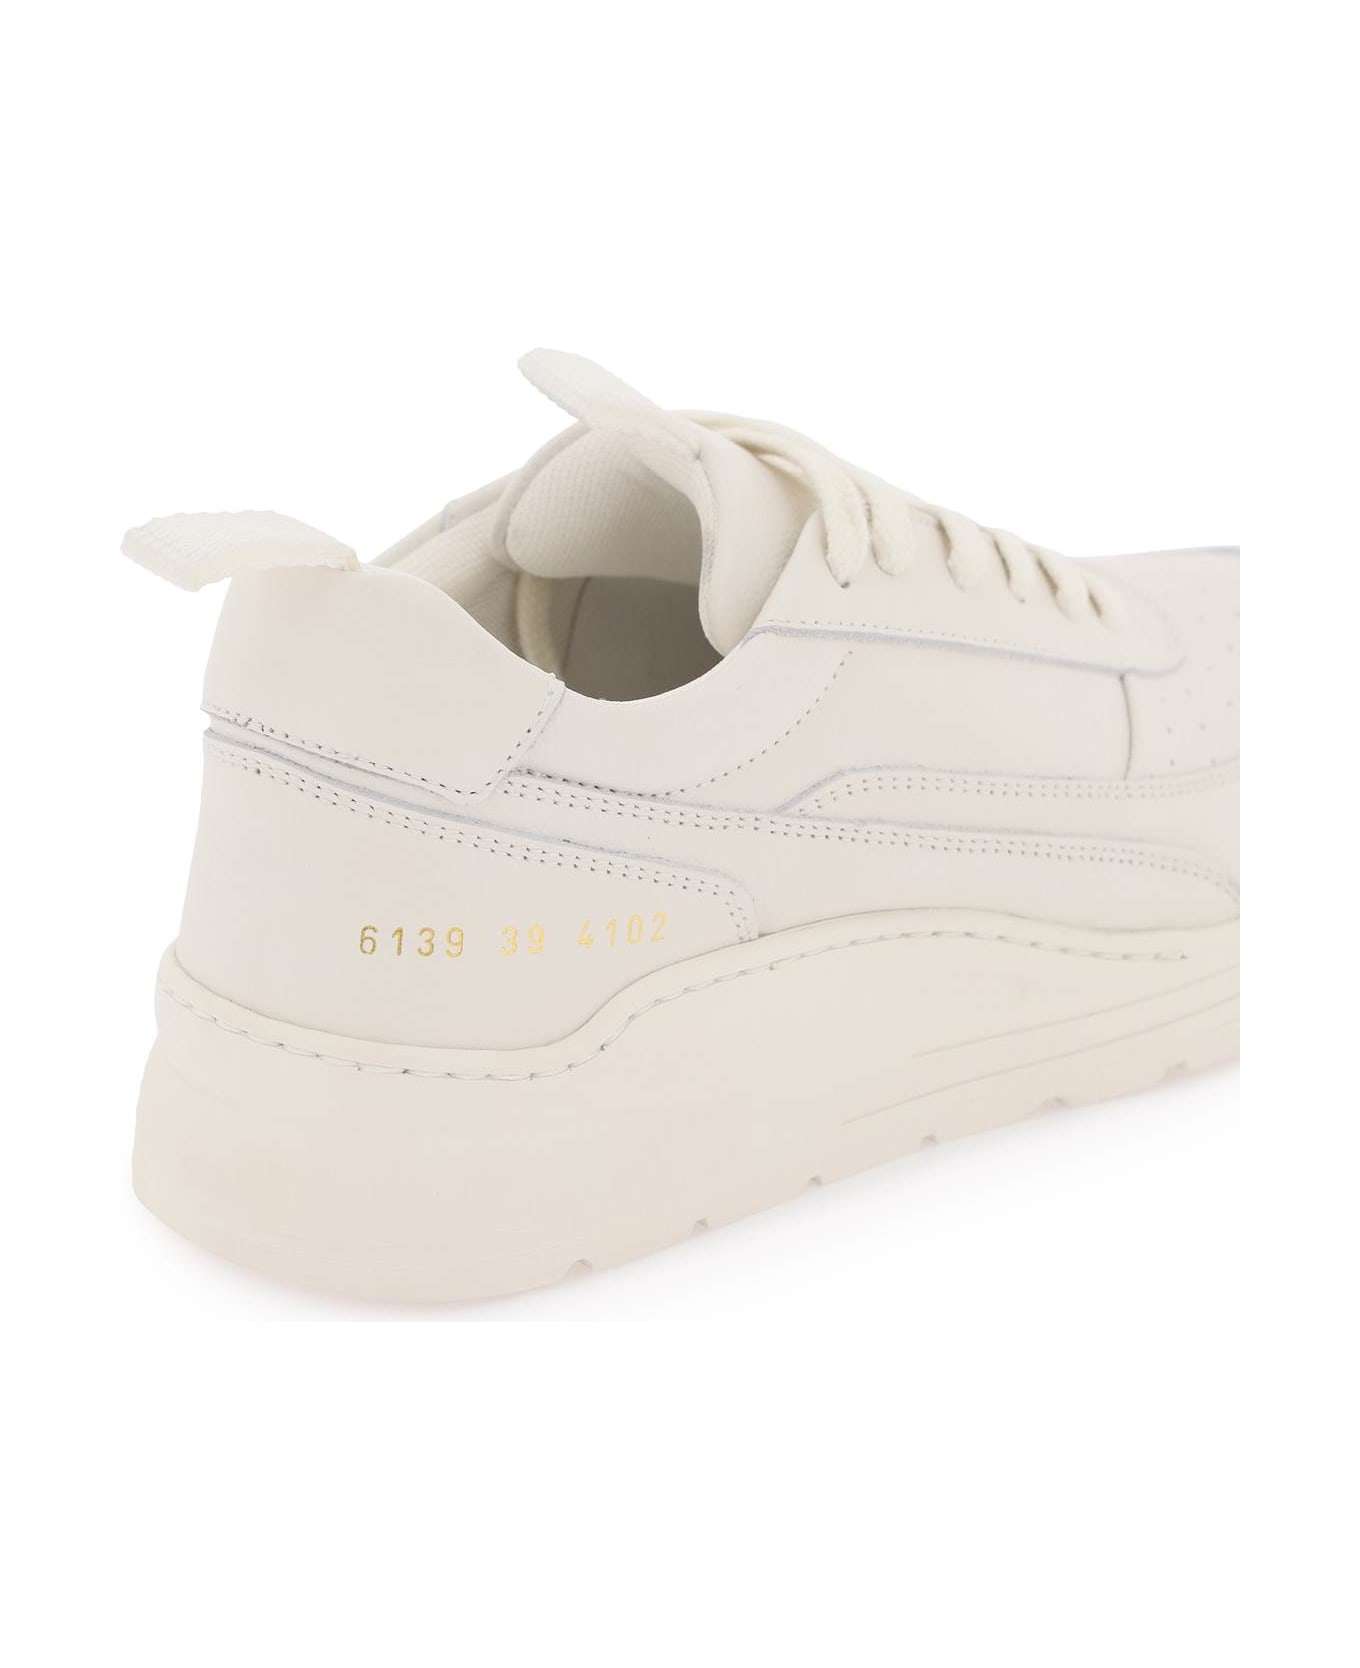 Common Projects Track 90 Sneakers - BONE WHITE (White) スニーカー